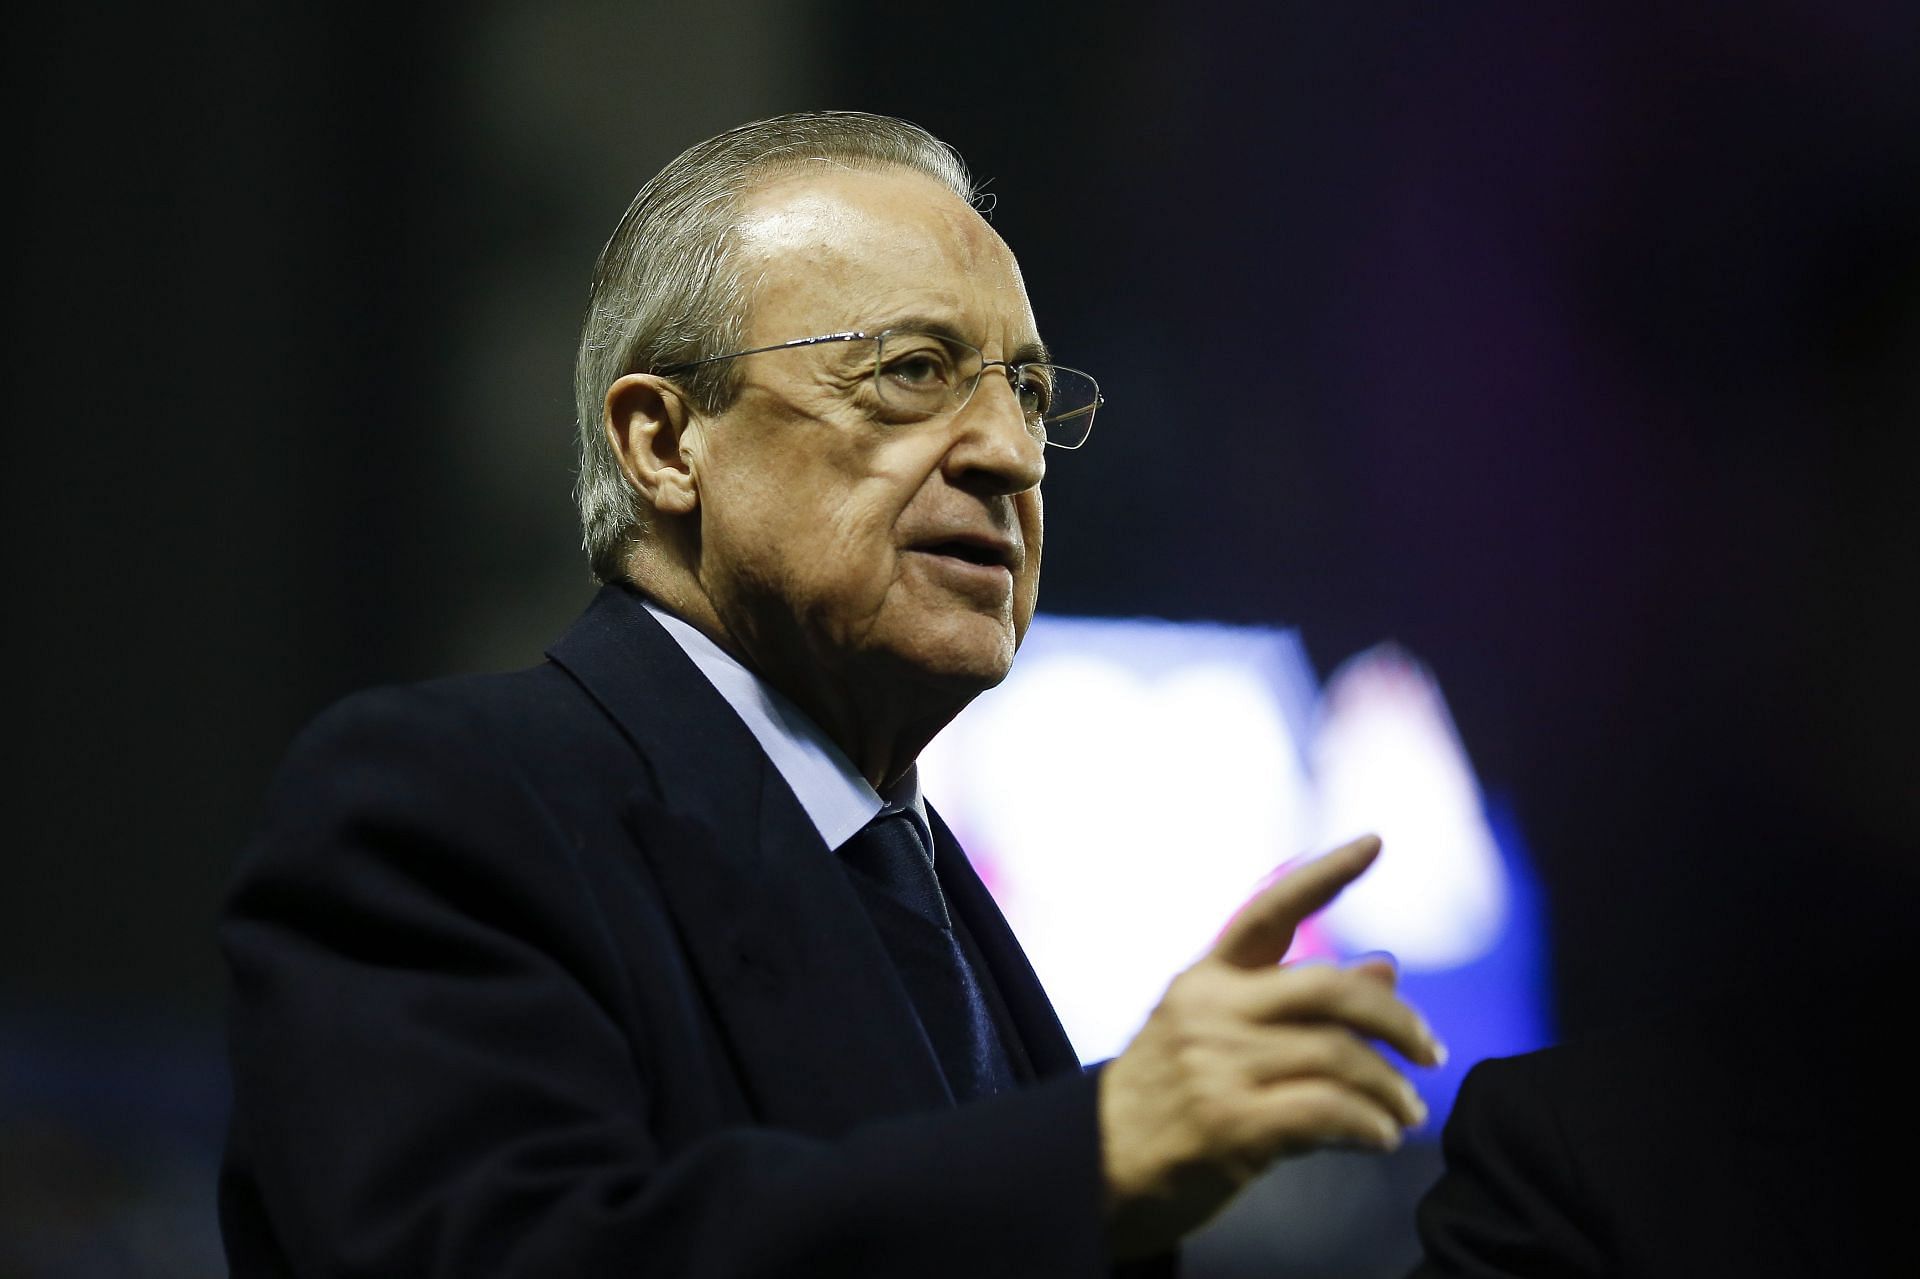 Real Madrid supremo Florentino Perez has been through a lot in 2021.